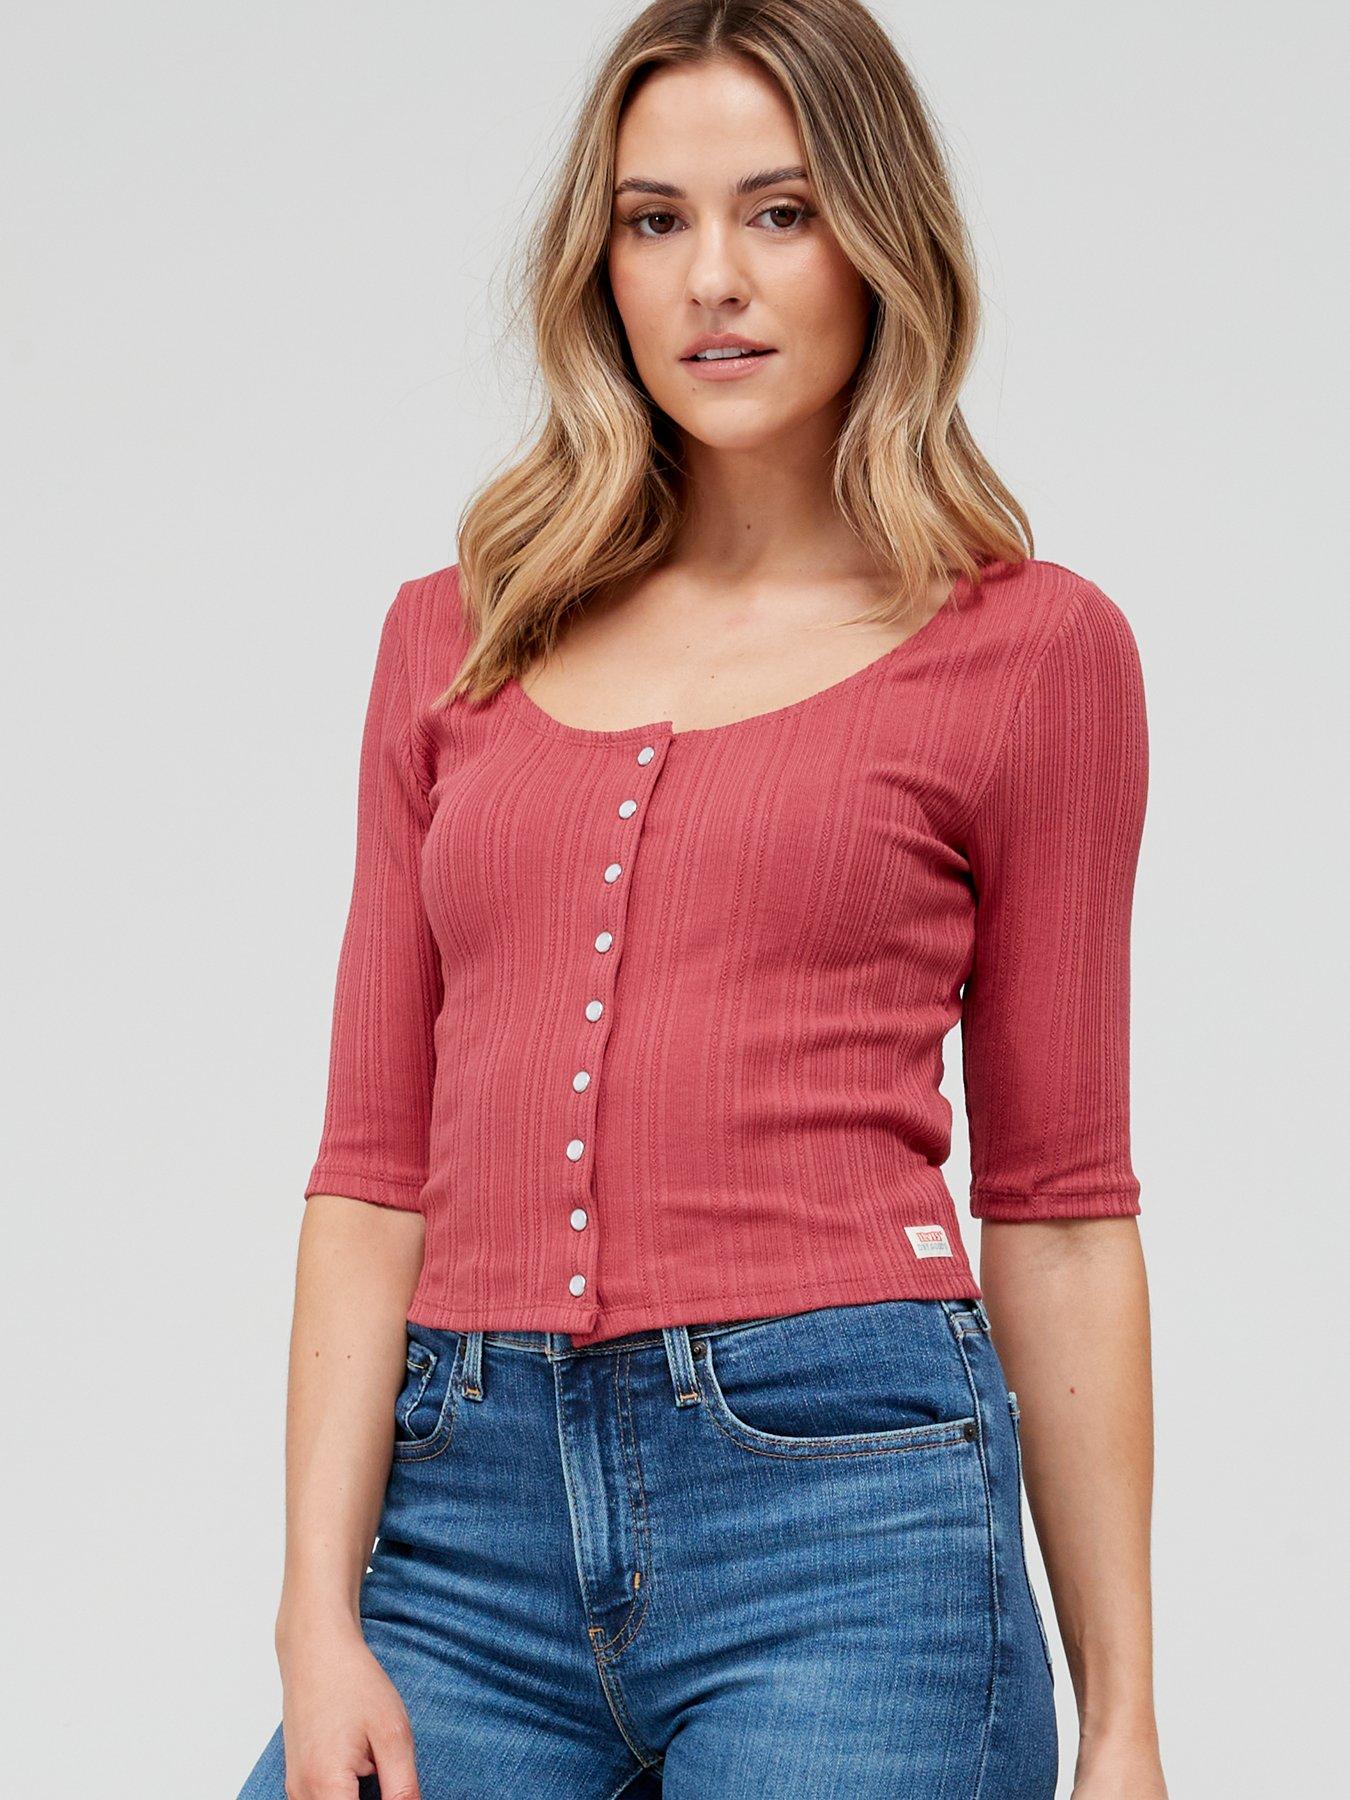 Levi's Dry Goods Pointelle Top - Earth Red 